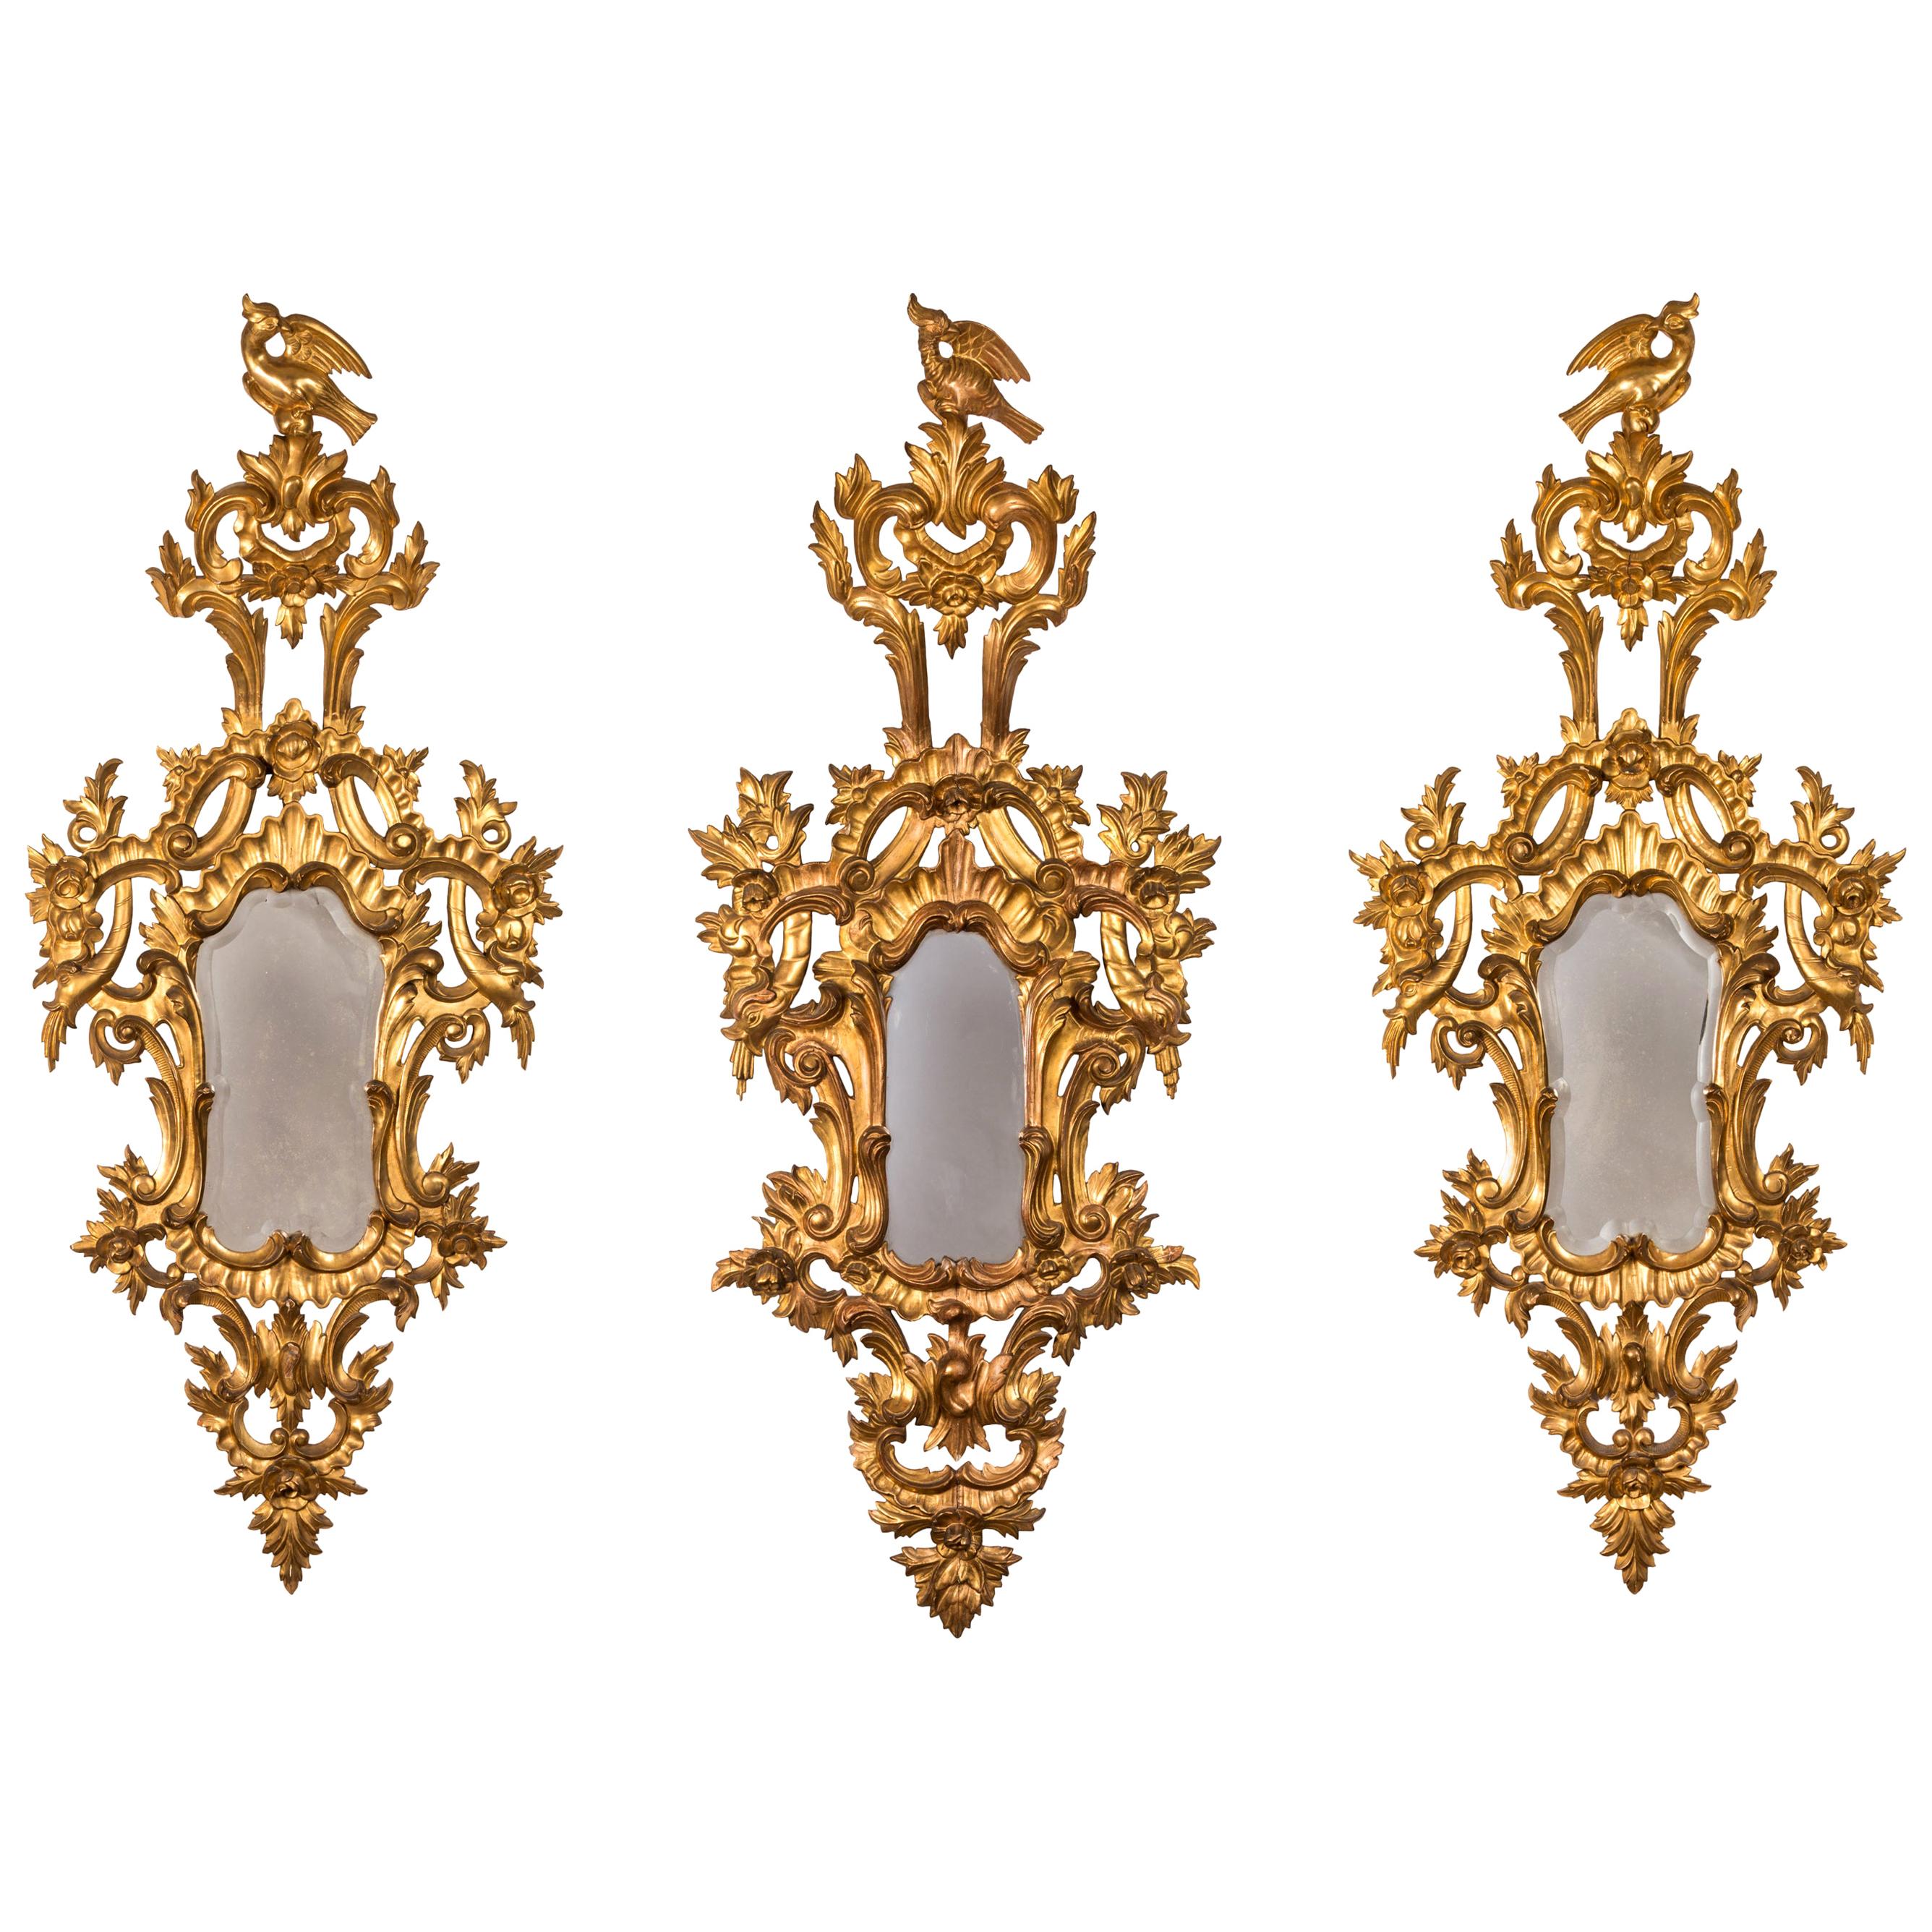 Matching Set of Three 18th Century French Rococo Carved Giltwood Mirrors